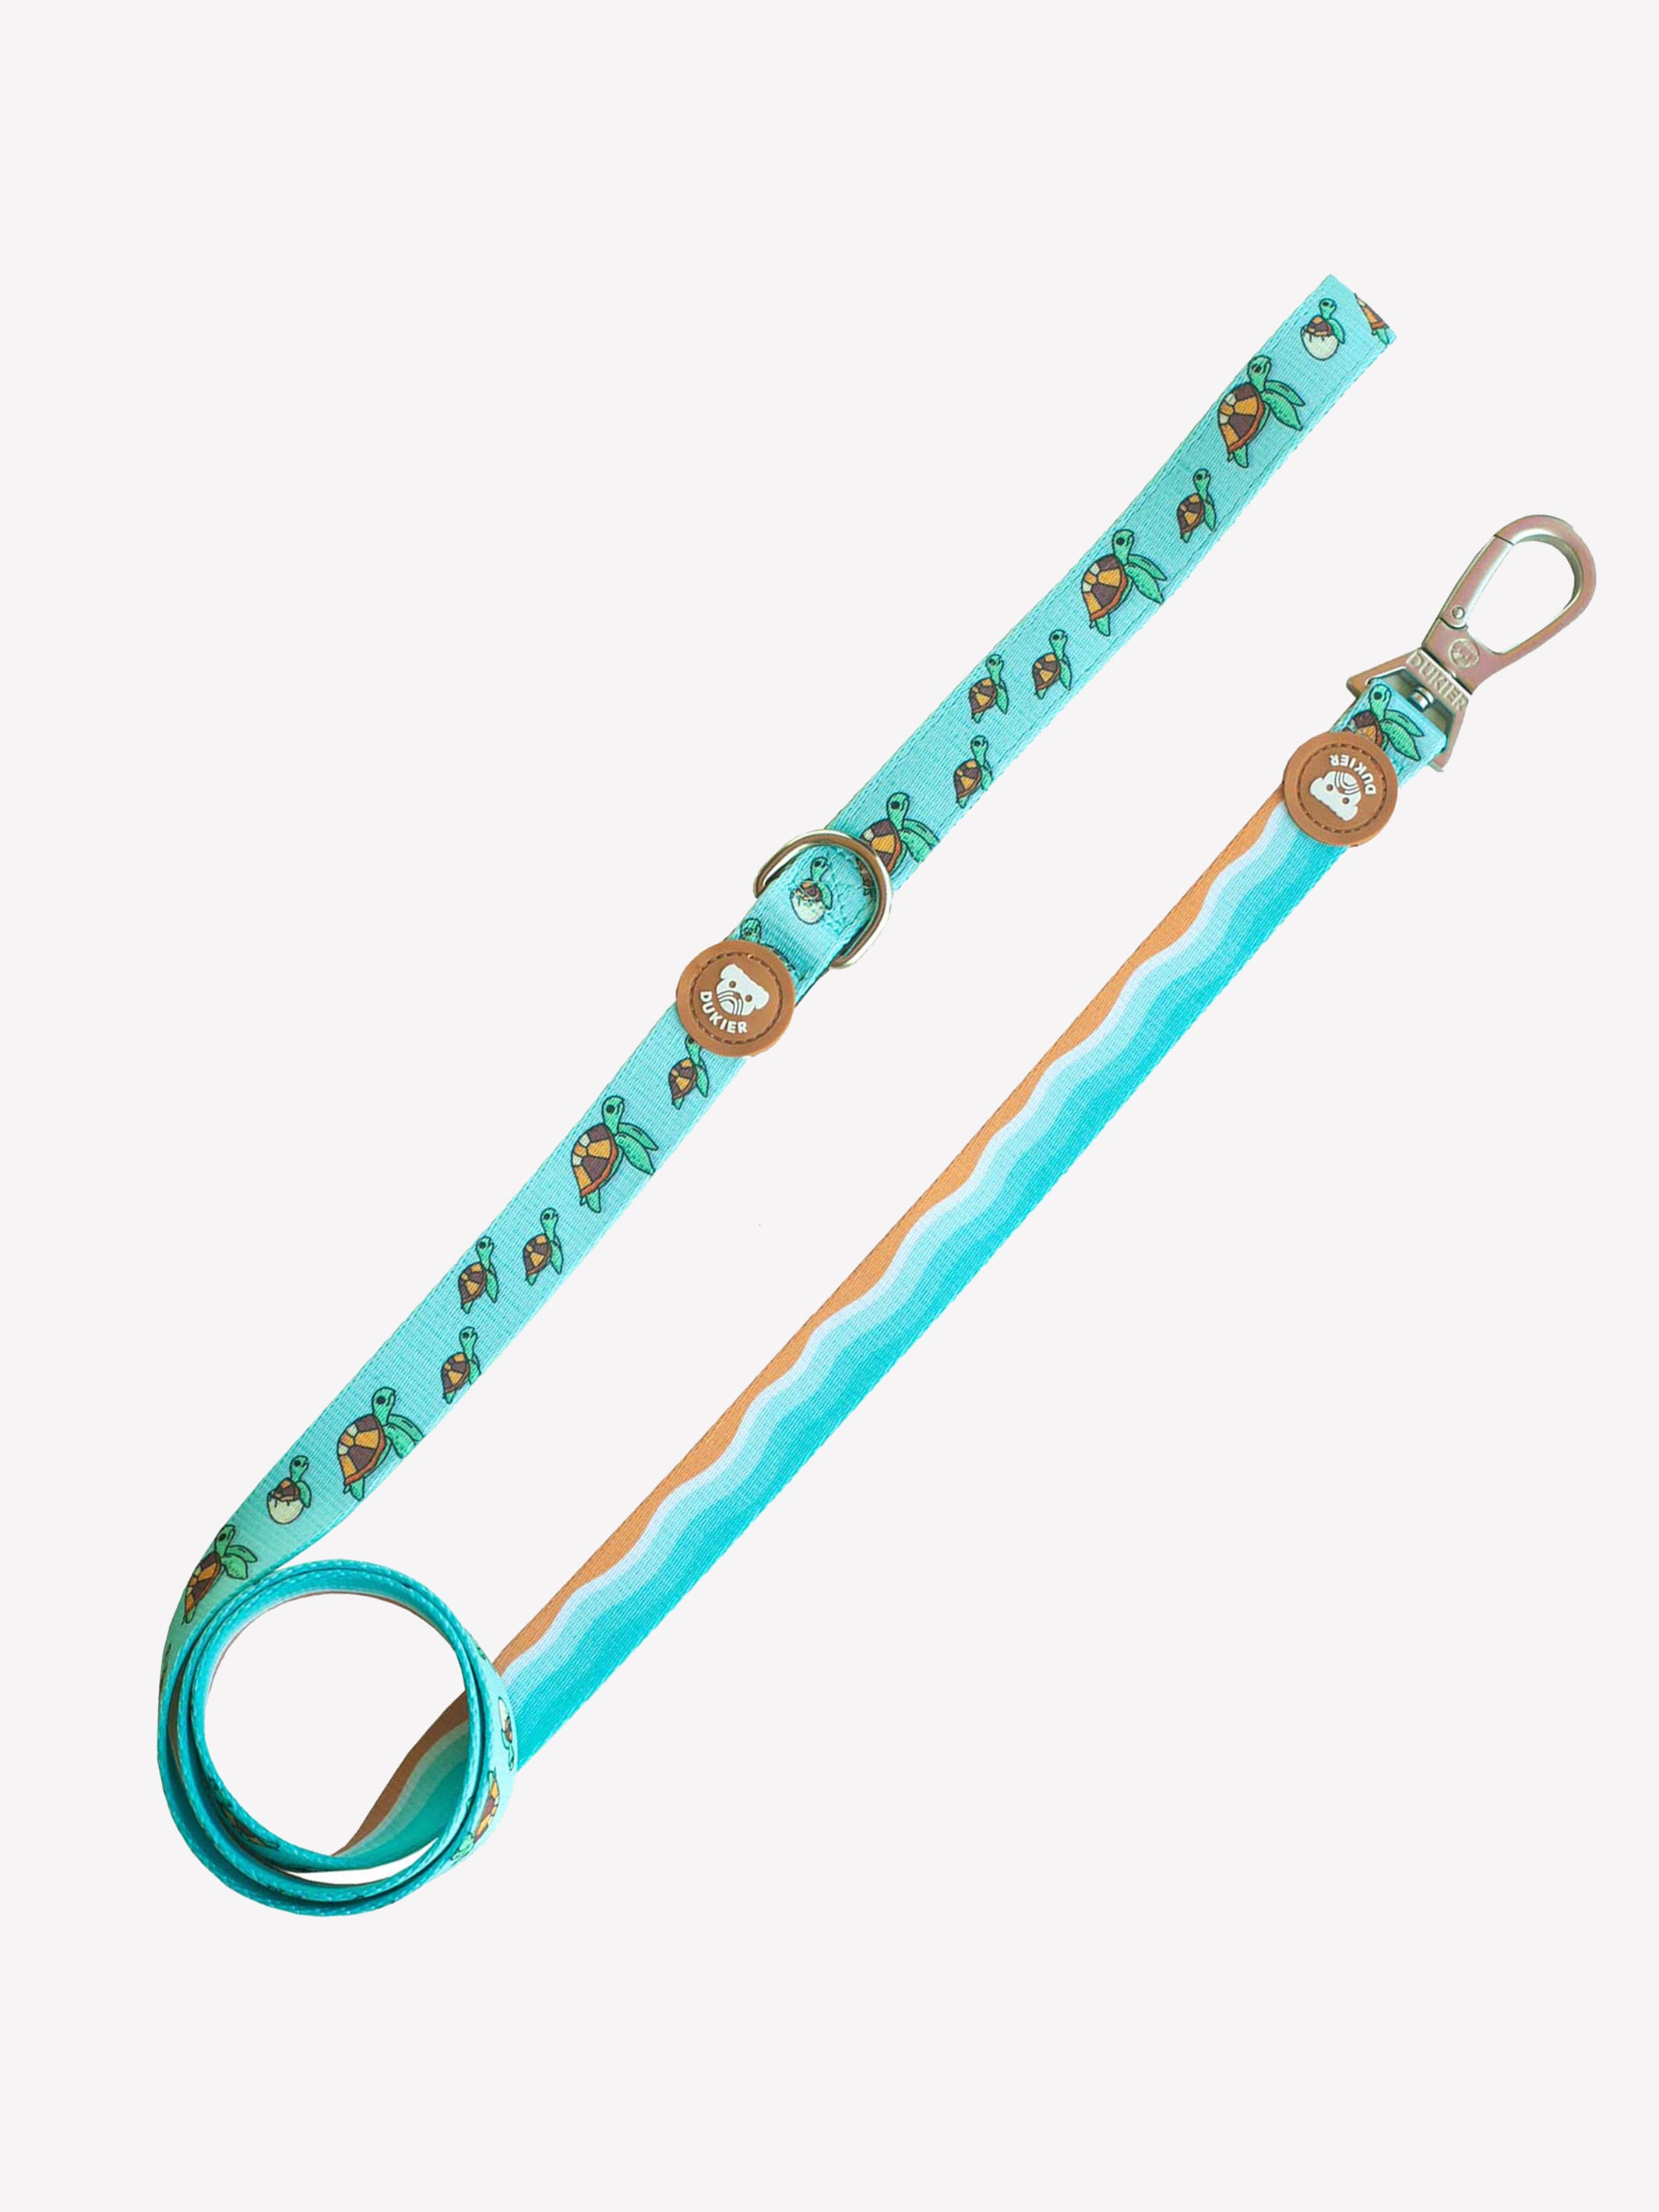 TURTLE LEASH FOR DOGS